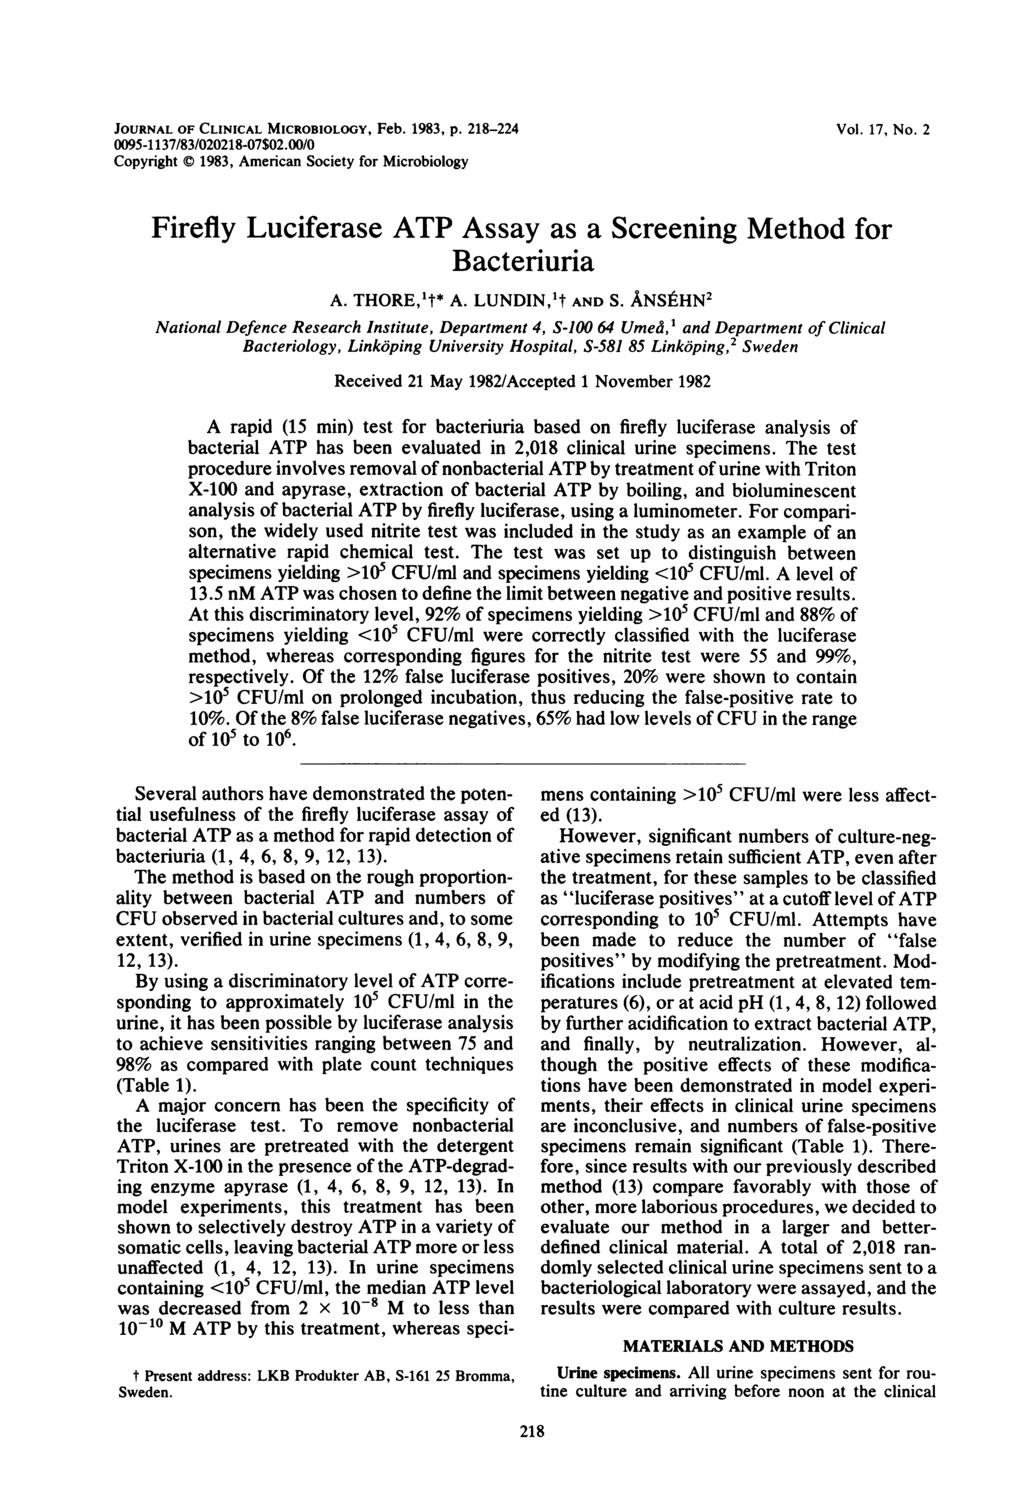 JOURNAL OF CLINICAL MICROBIOLOGY, Feb. 1983, p. 218-224 0095-1137/83/020218-07$02.OO/O Copyright 1983, American Society for Microbiology Vol. 17, No.